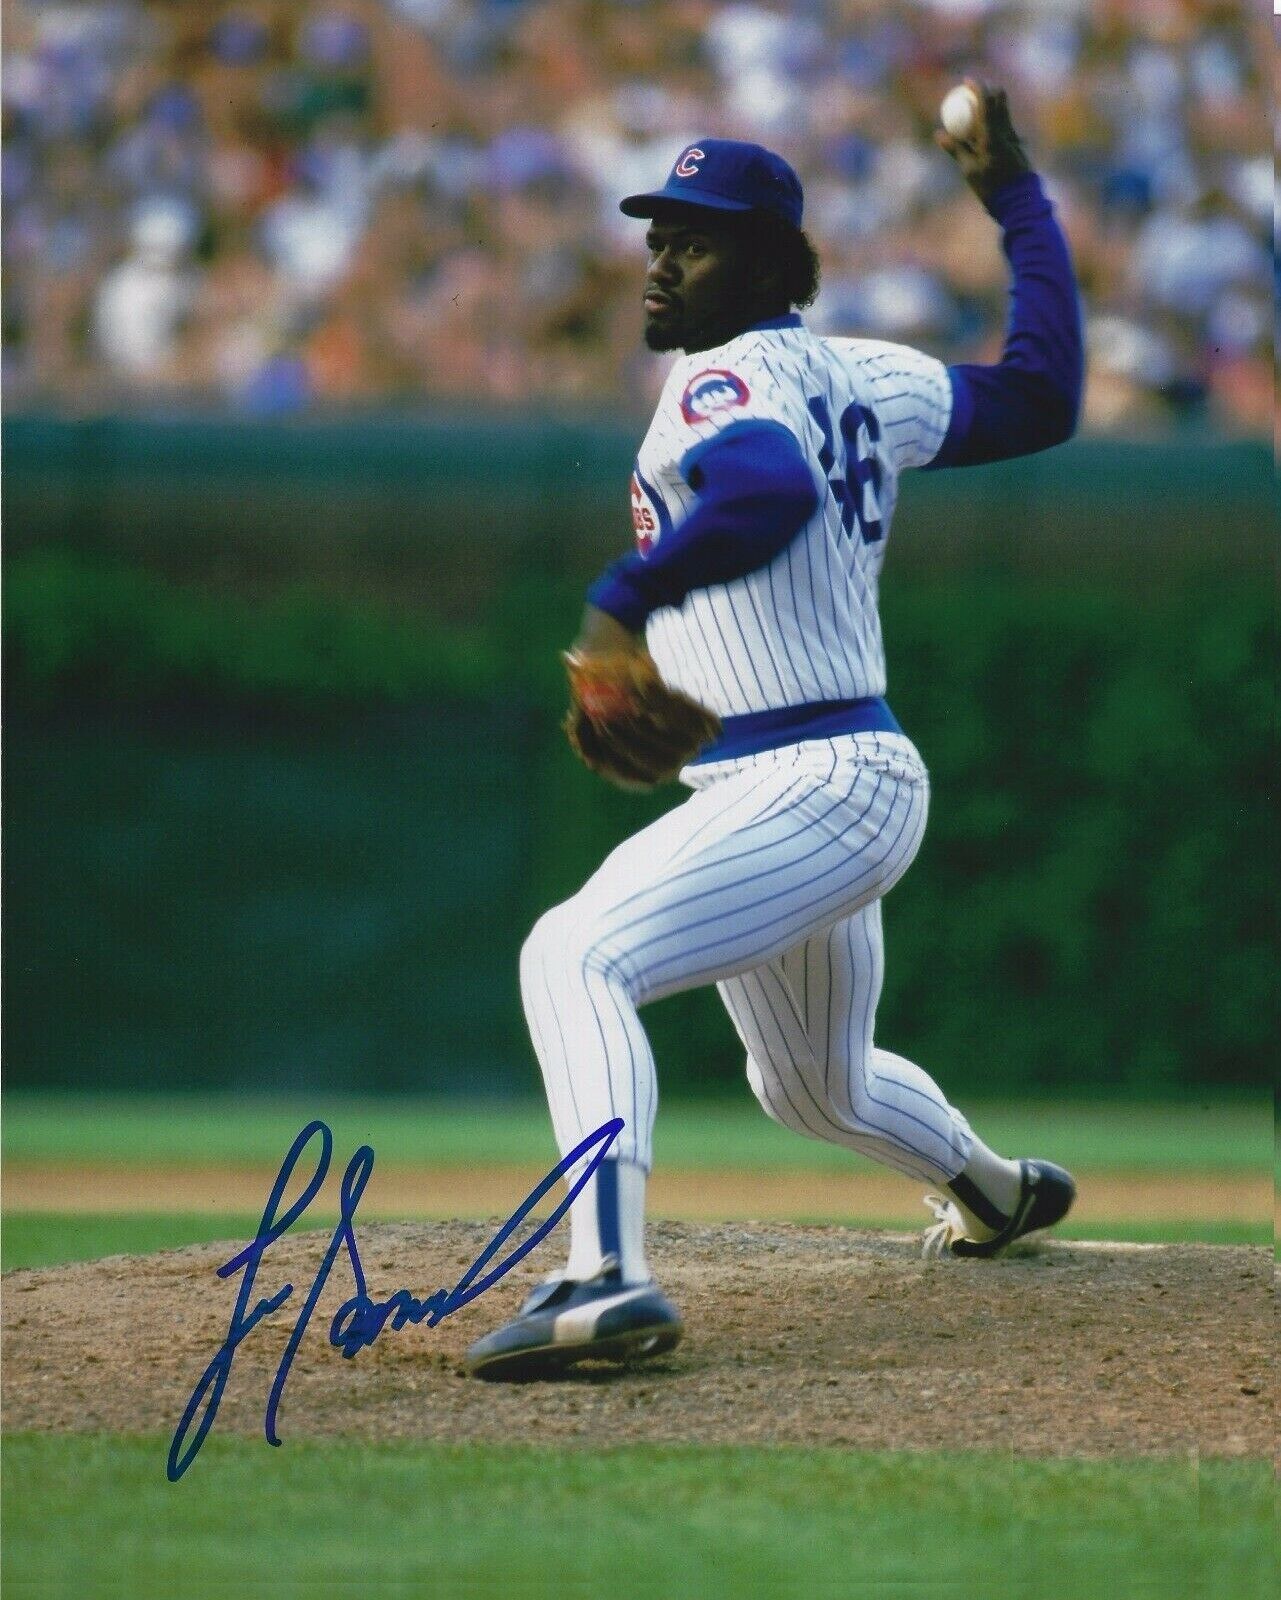 Lee Smith Autographed Signed 8x10 Photo Poster painting ( HOF Cubs ) REPRINT